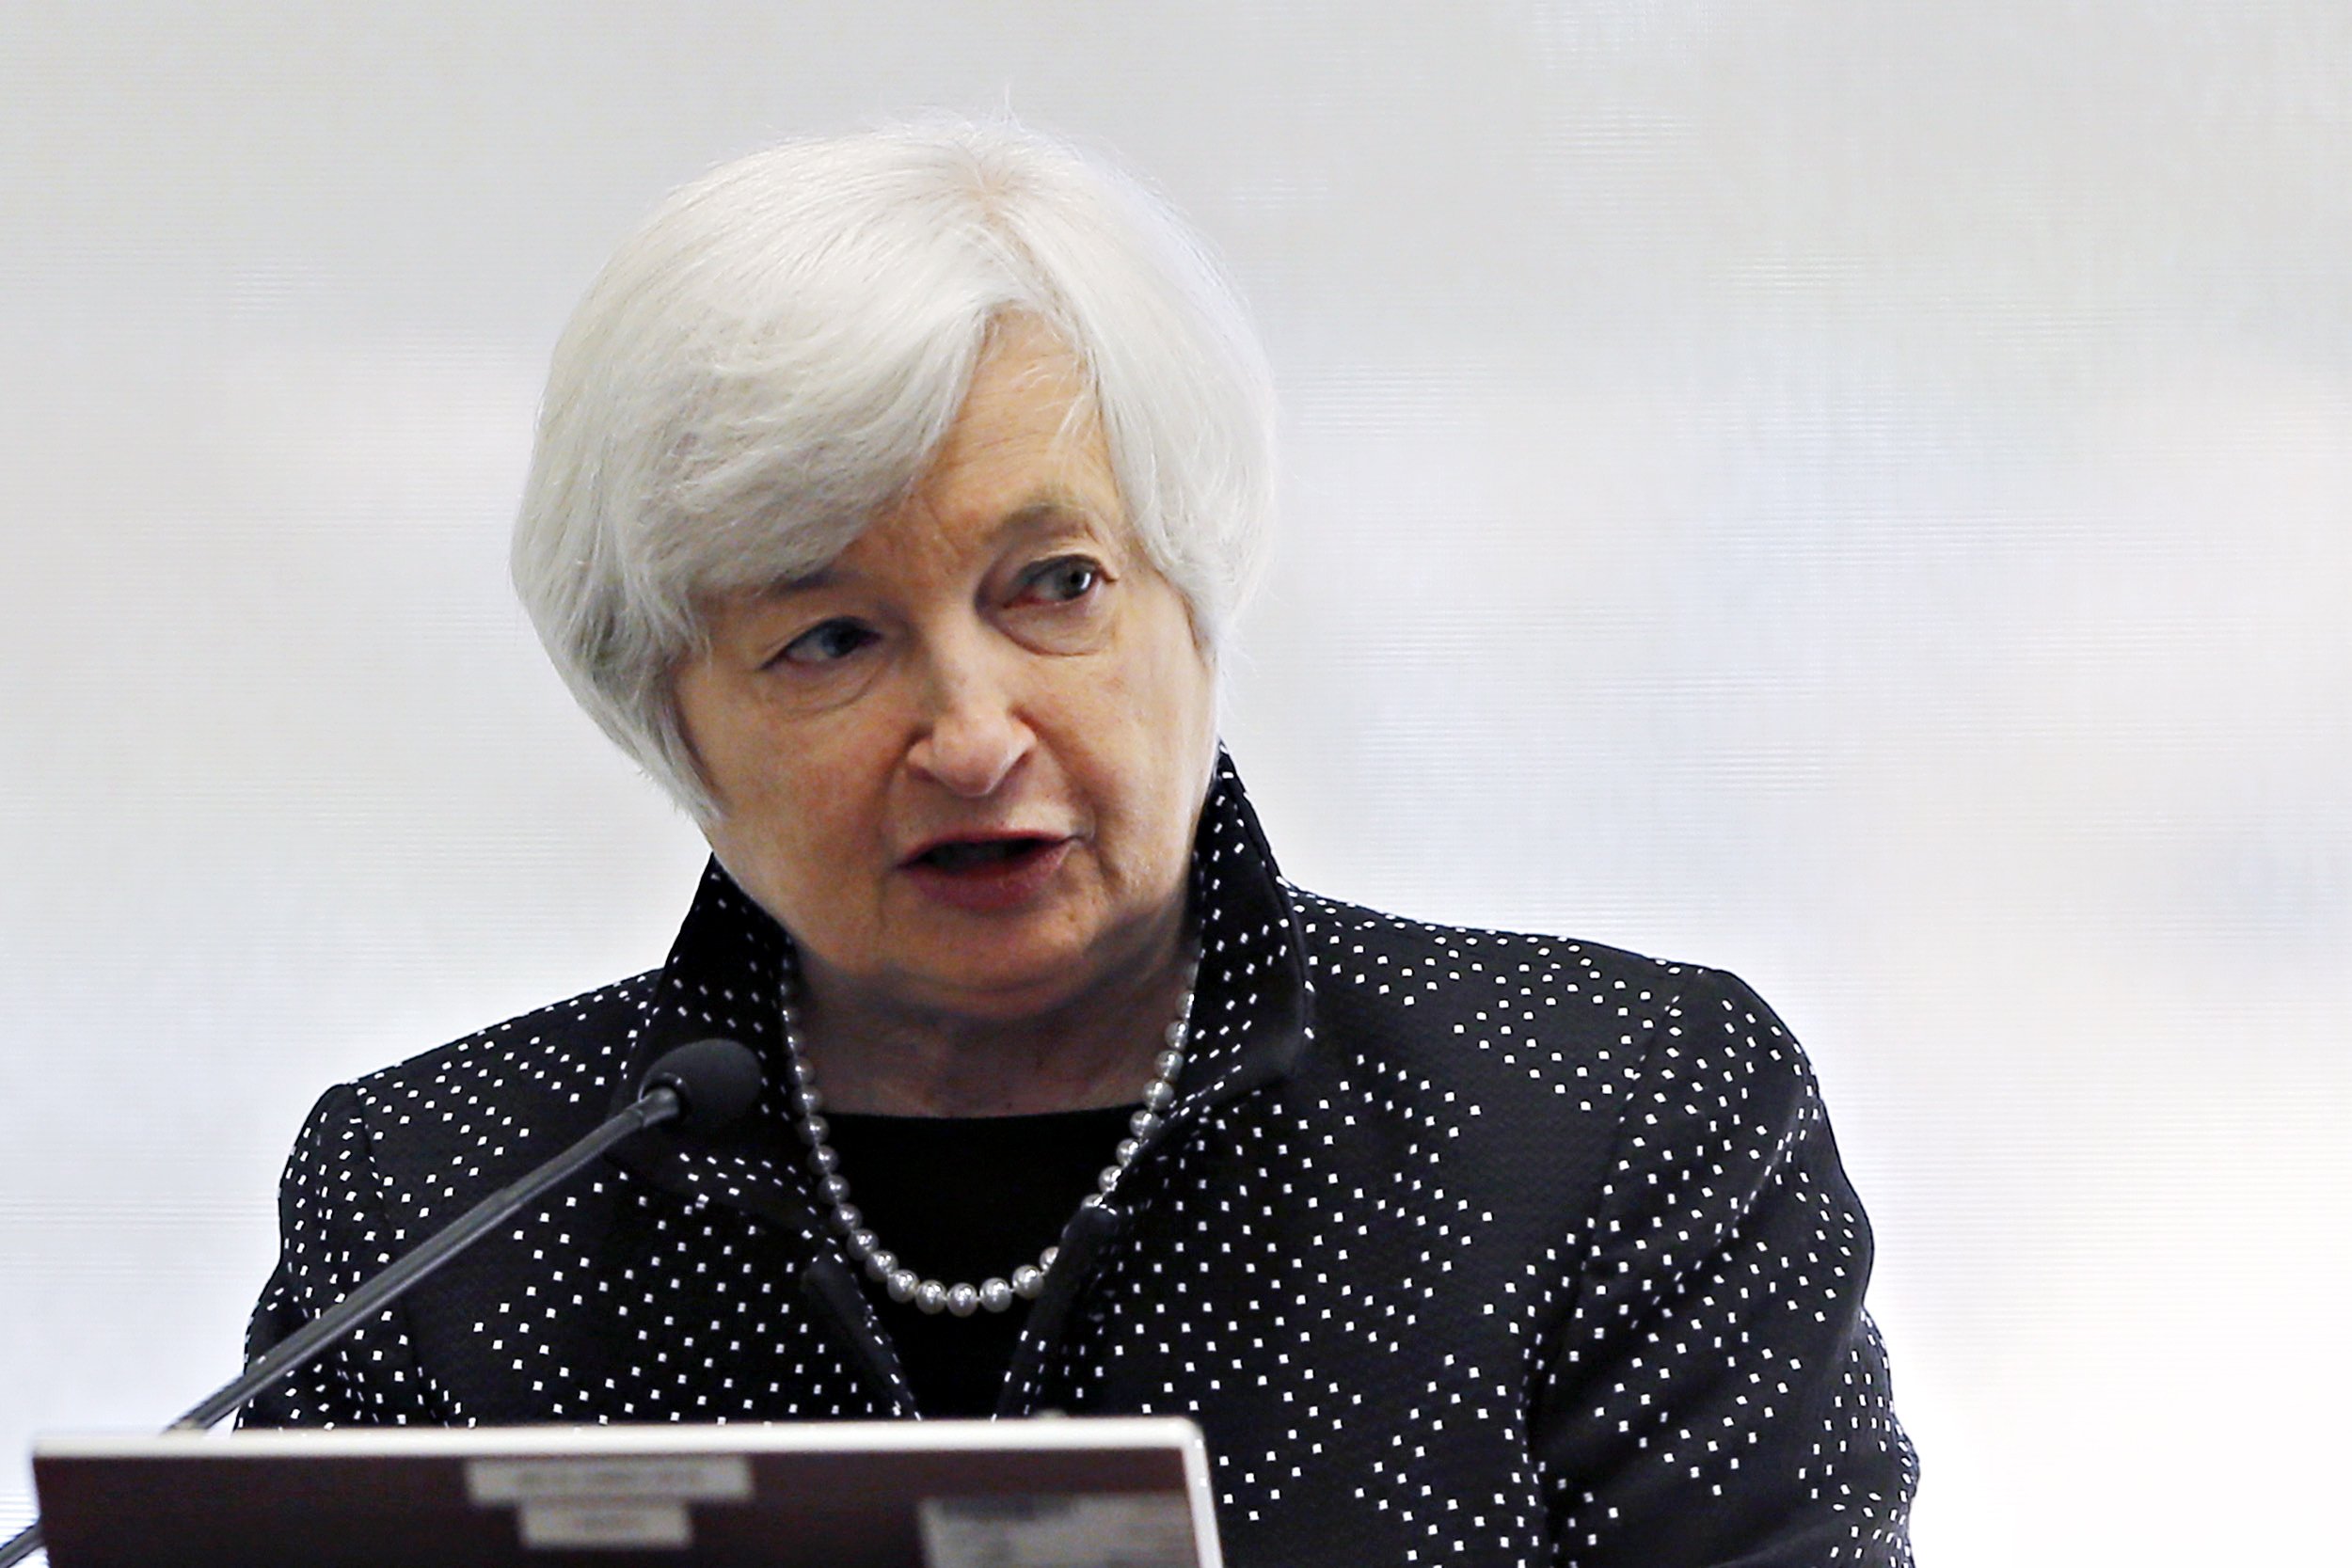 U.S. Federal Reserve Chair Janet Yellen speaks at the Federal Reserve Bank of Boston Economic Conference on Inequality of Economic Opportunity in Boston on Oct. 17, 2014. (Brian Snyder—Reuters)